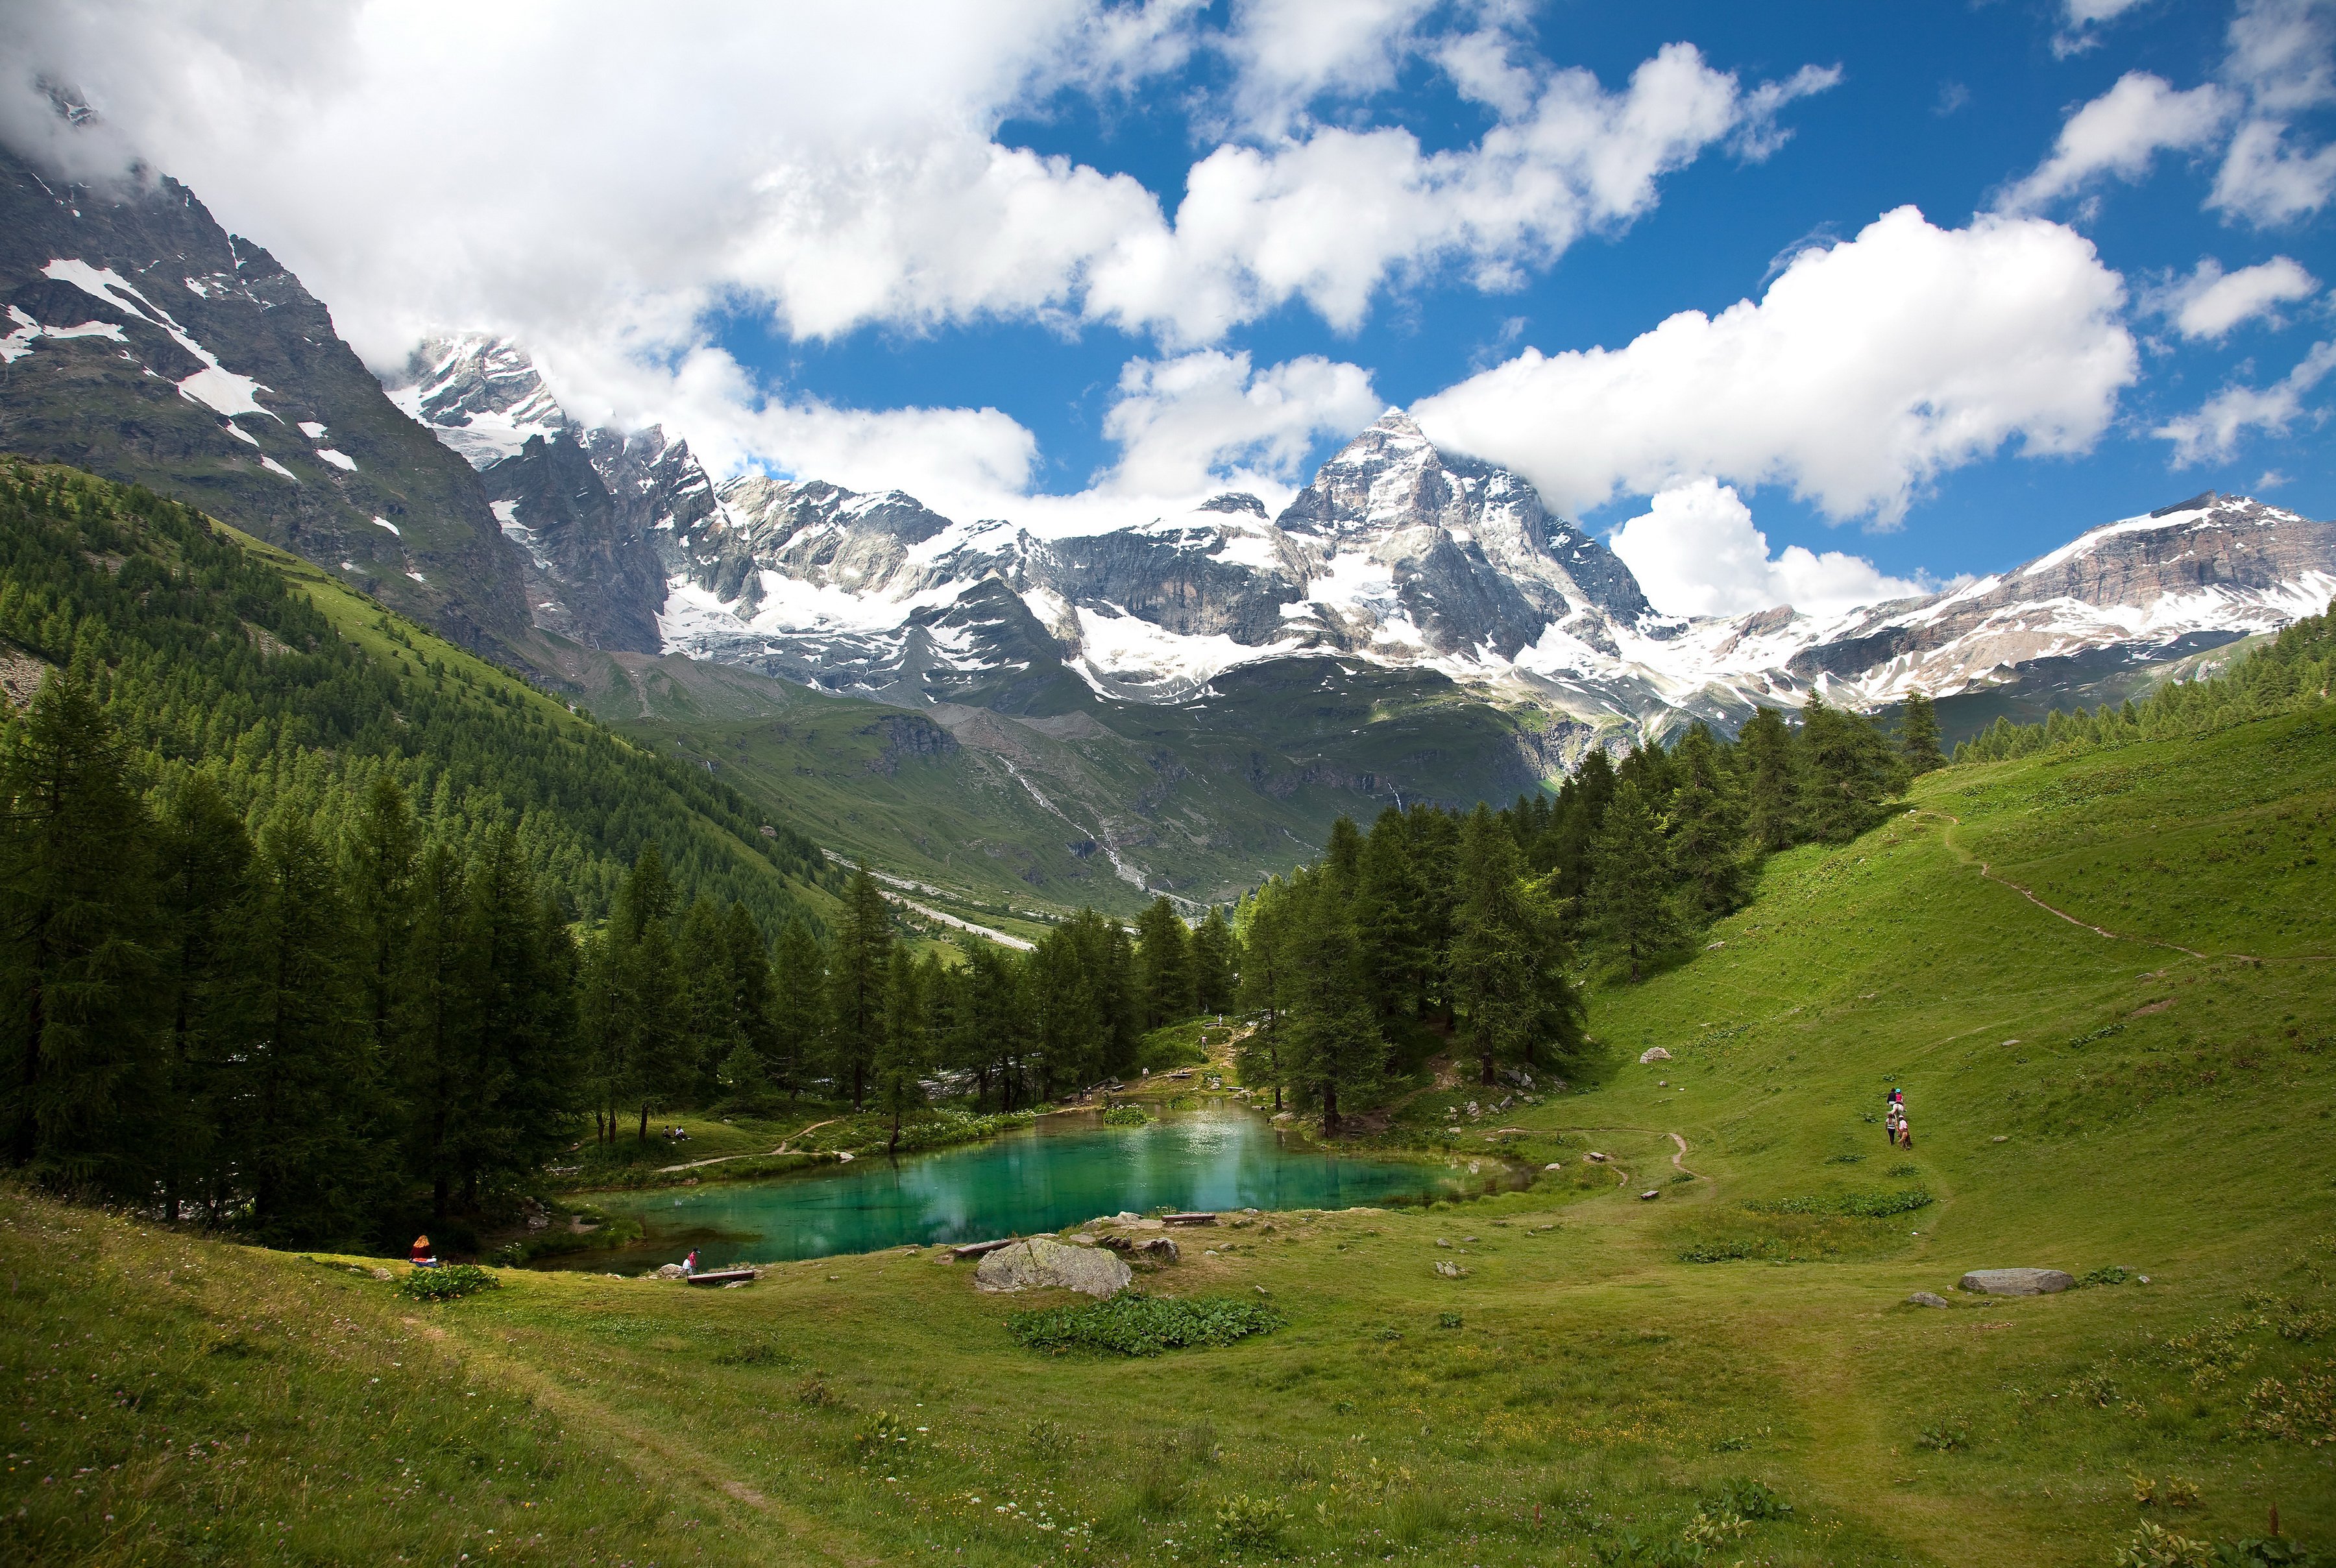 austria, Mountains, Forests, Lake, Sky, Scenery, Clouds, Alps, Nature Wallpaper